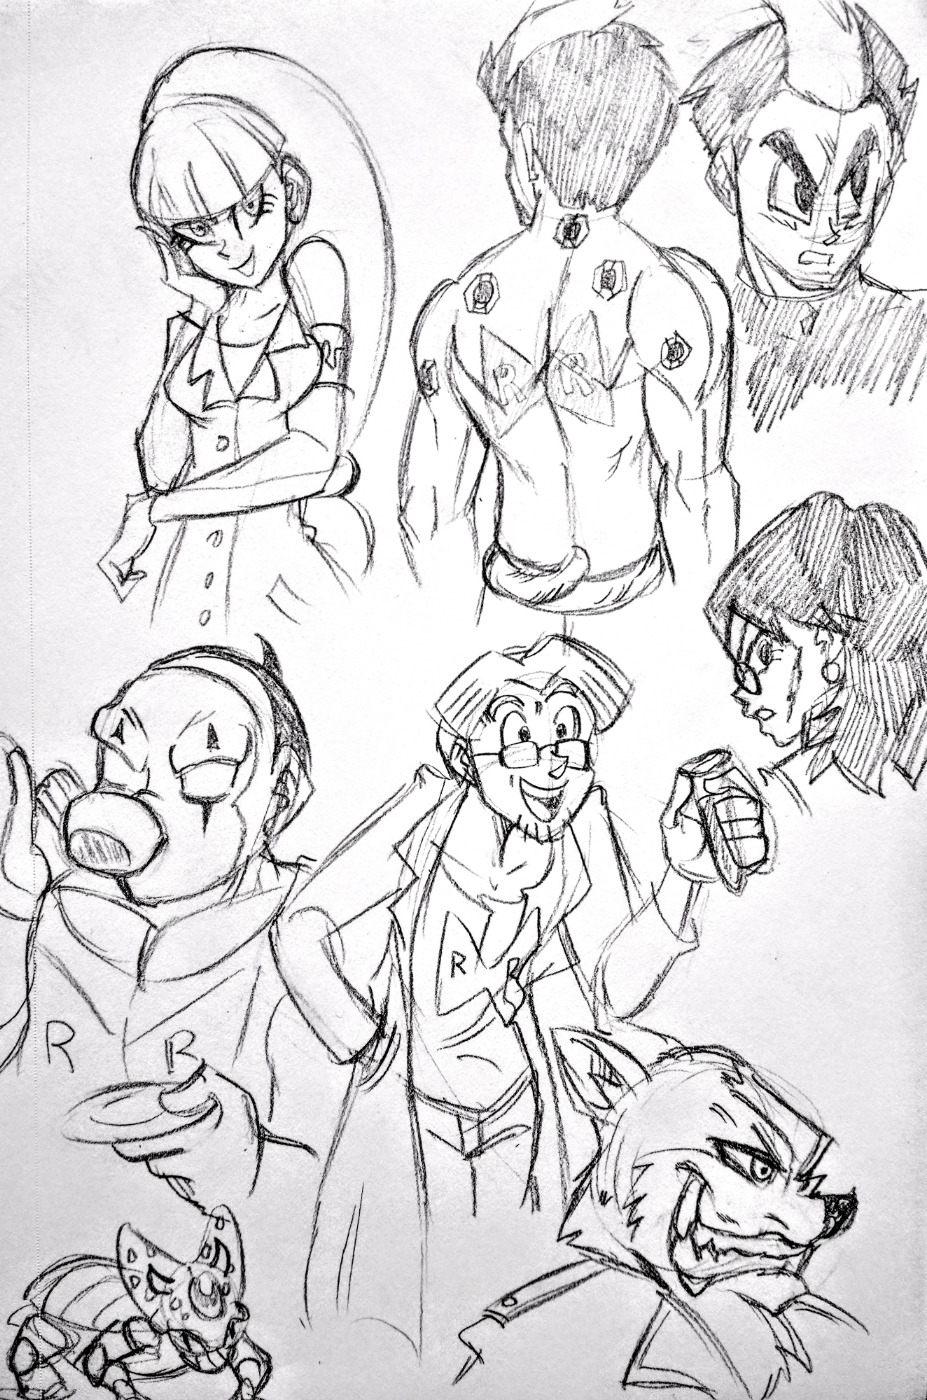 Quick doodles of some of my OCs between work. One day I’ll do something with them.